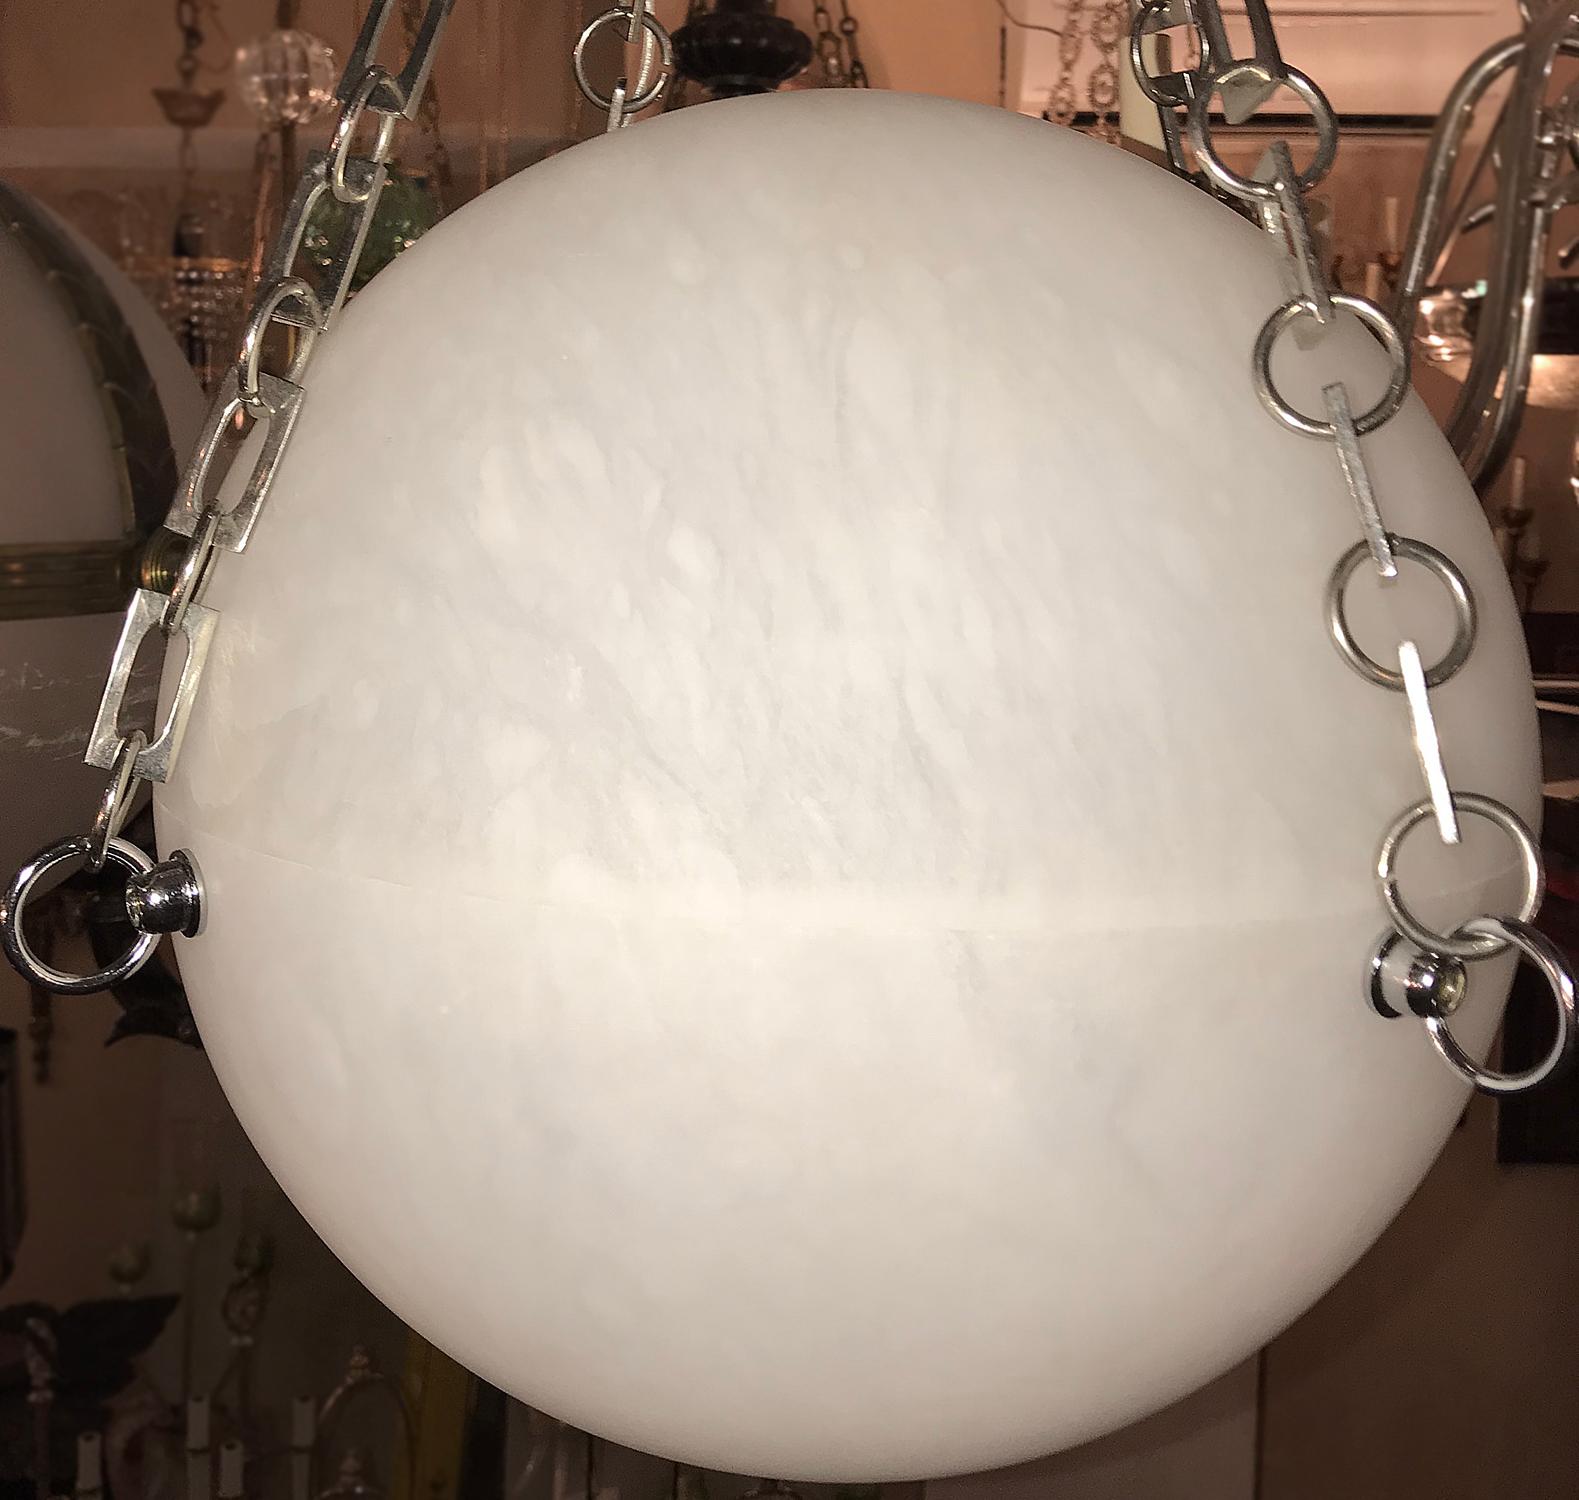 A pair of circa 1950's globe lanterns with nickel plated chains and 4 interior lights. Sold individually.

Measurements:
Diameter: 24″
Min. drop: 30″